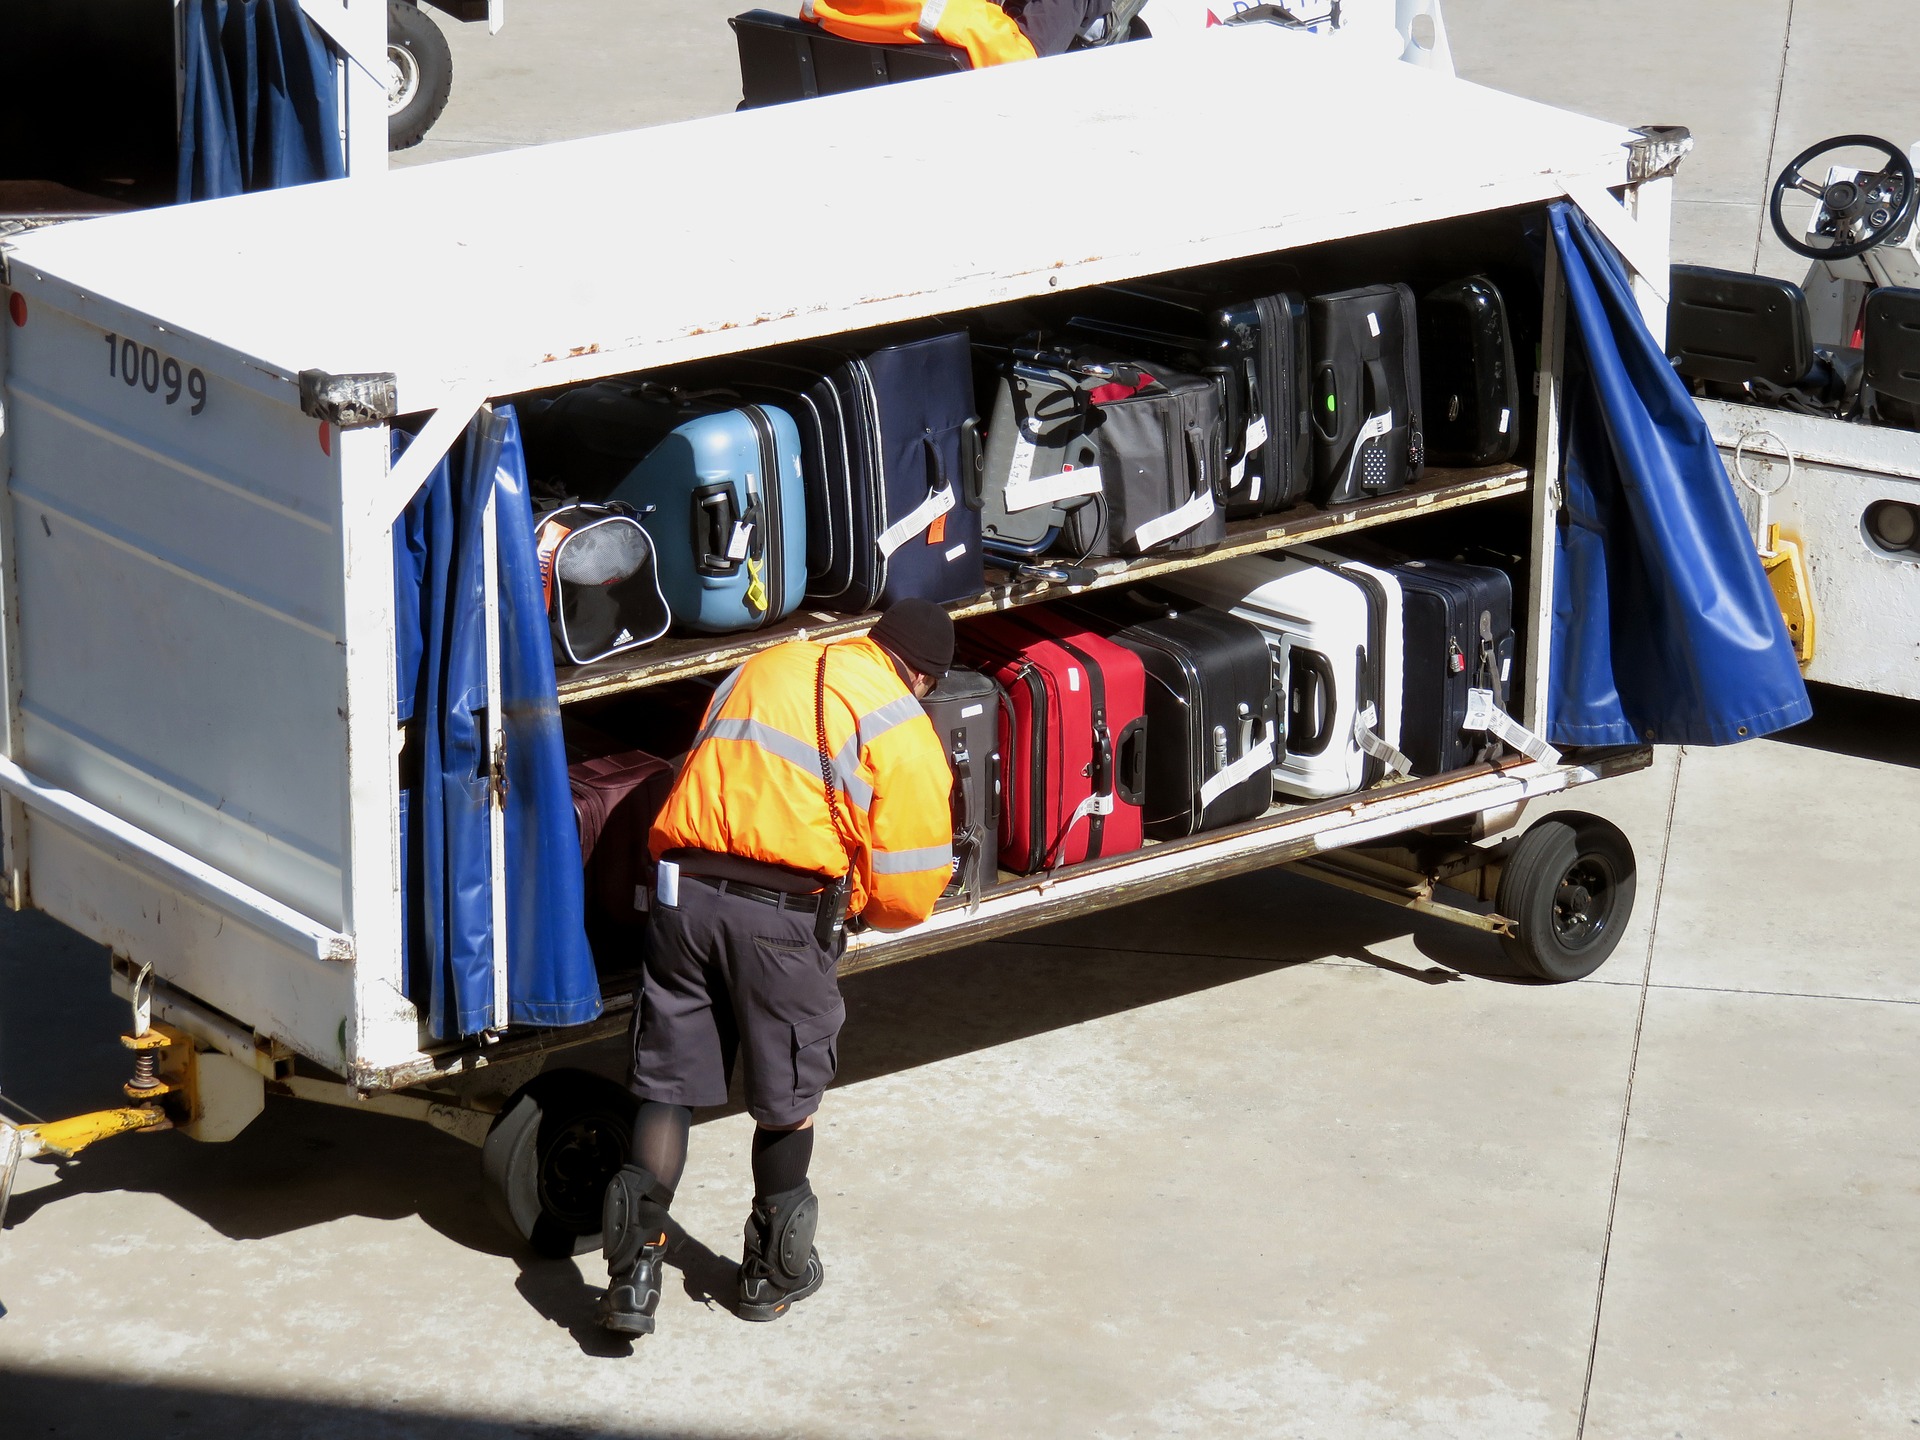 Baggage being loaded onto an airplane